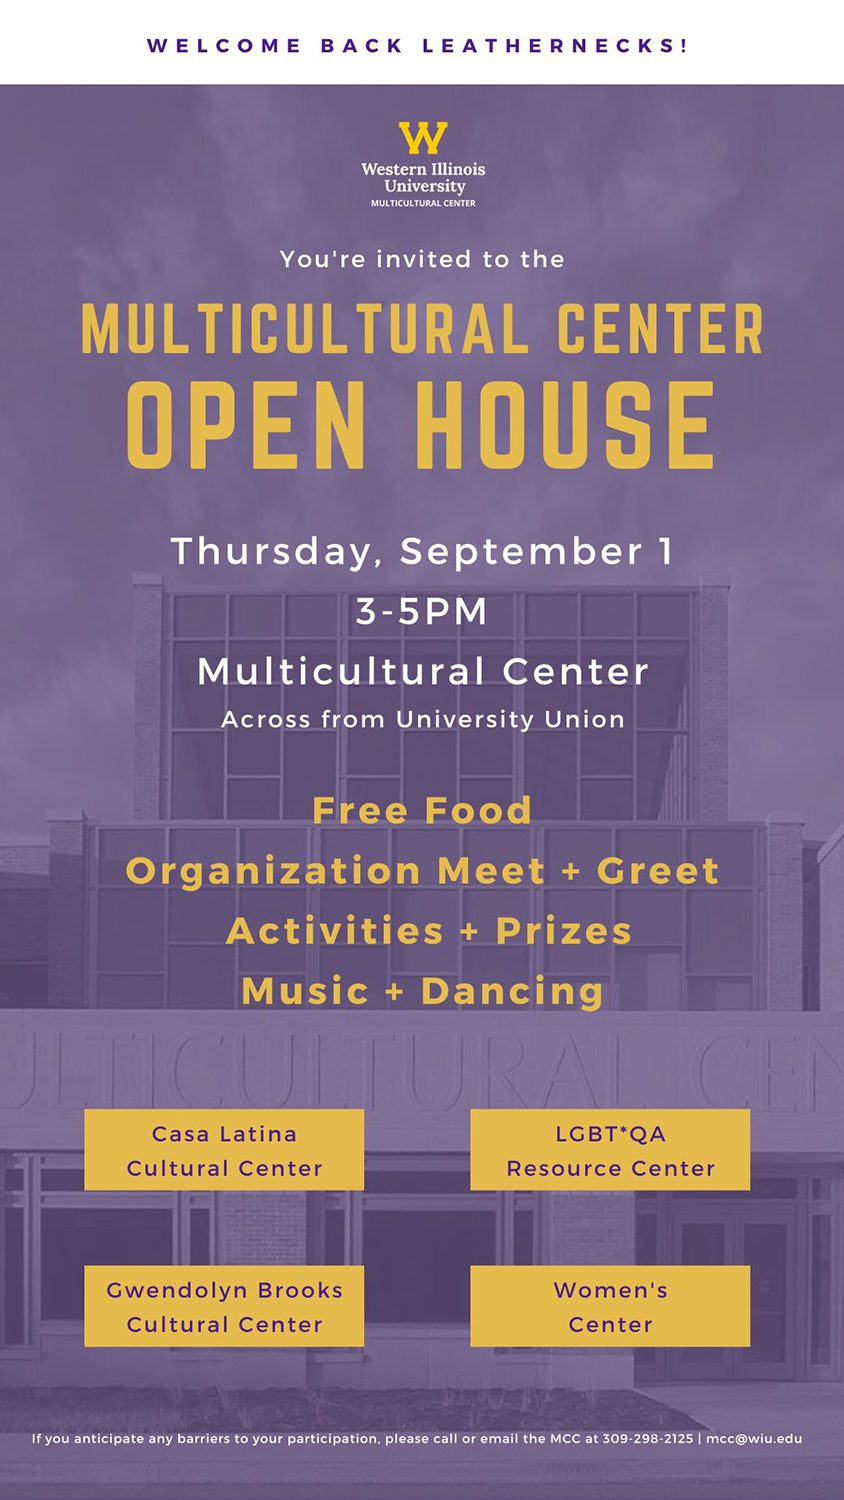 Western Illinois Multicultural Center to Host Annual Fall Open House Sept. 1